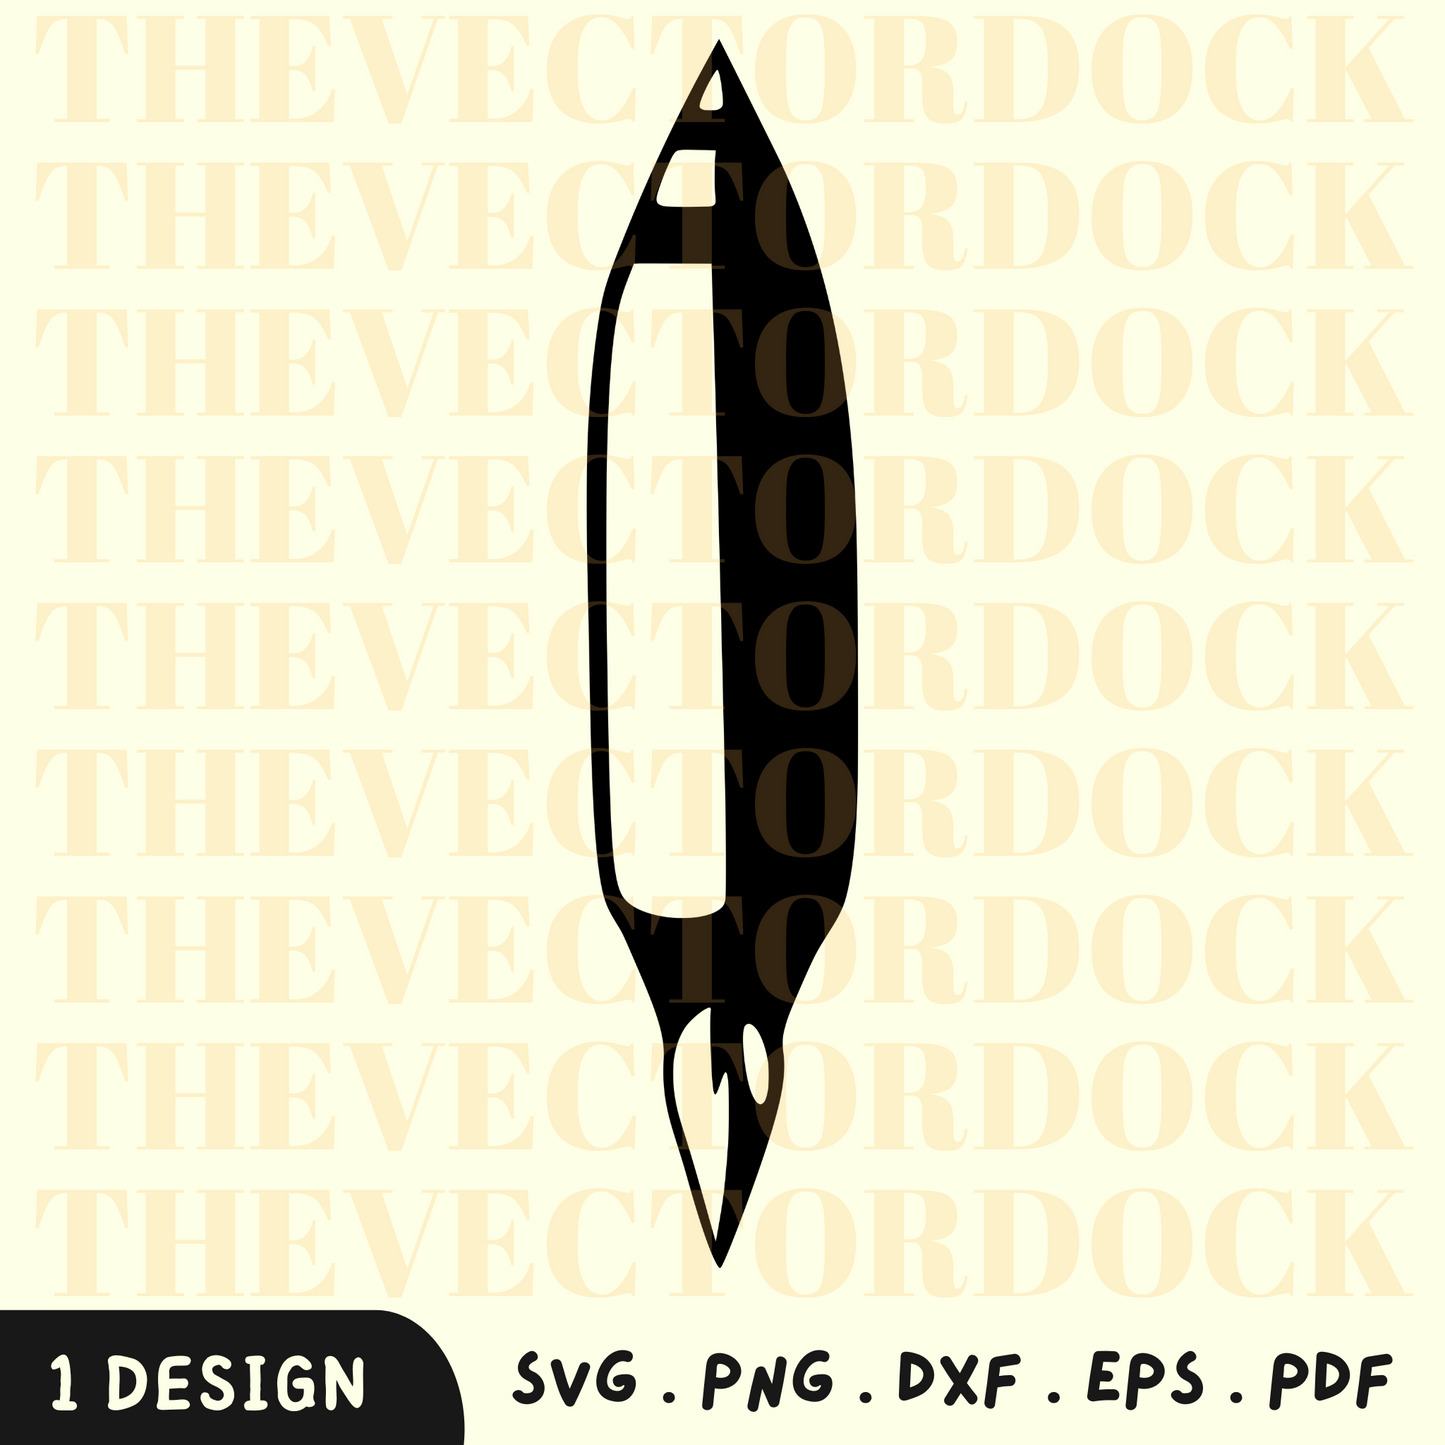 Starship SVG Design, Starship SVG, Space-Themed Business, Starship PNG, Spacecraft, Starship Vector